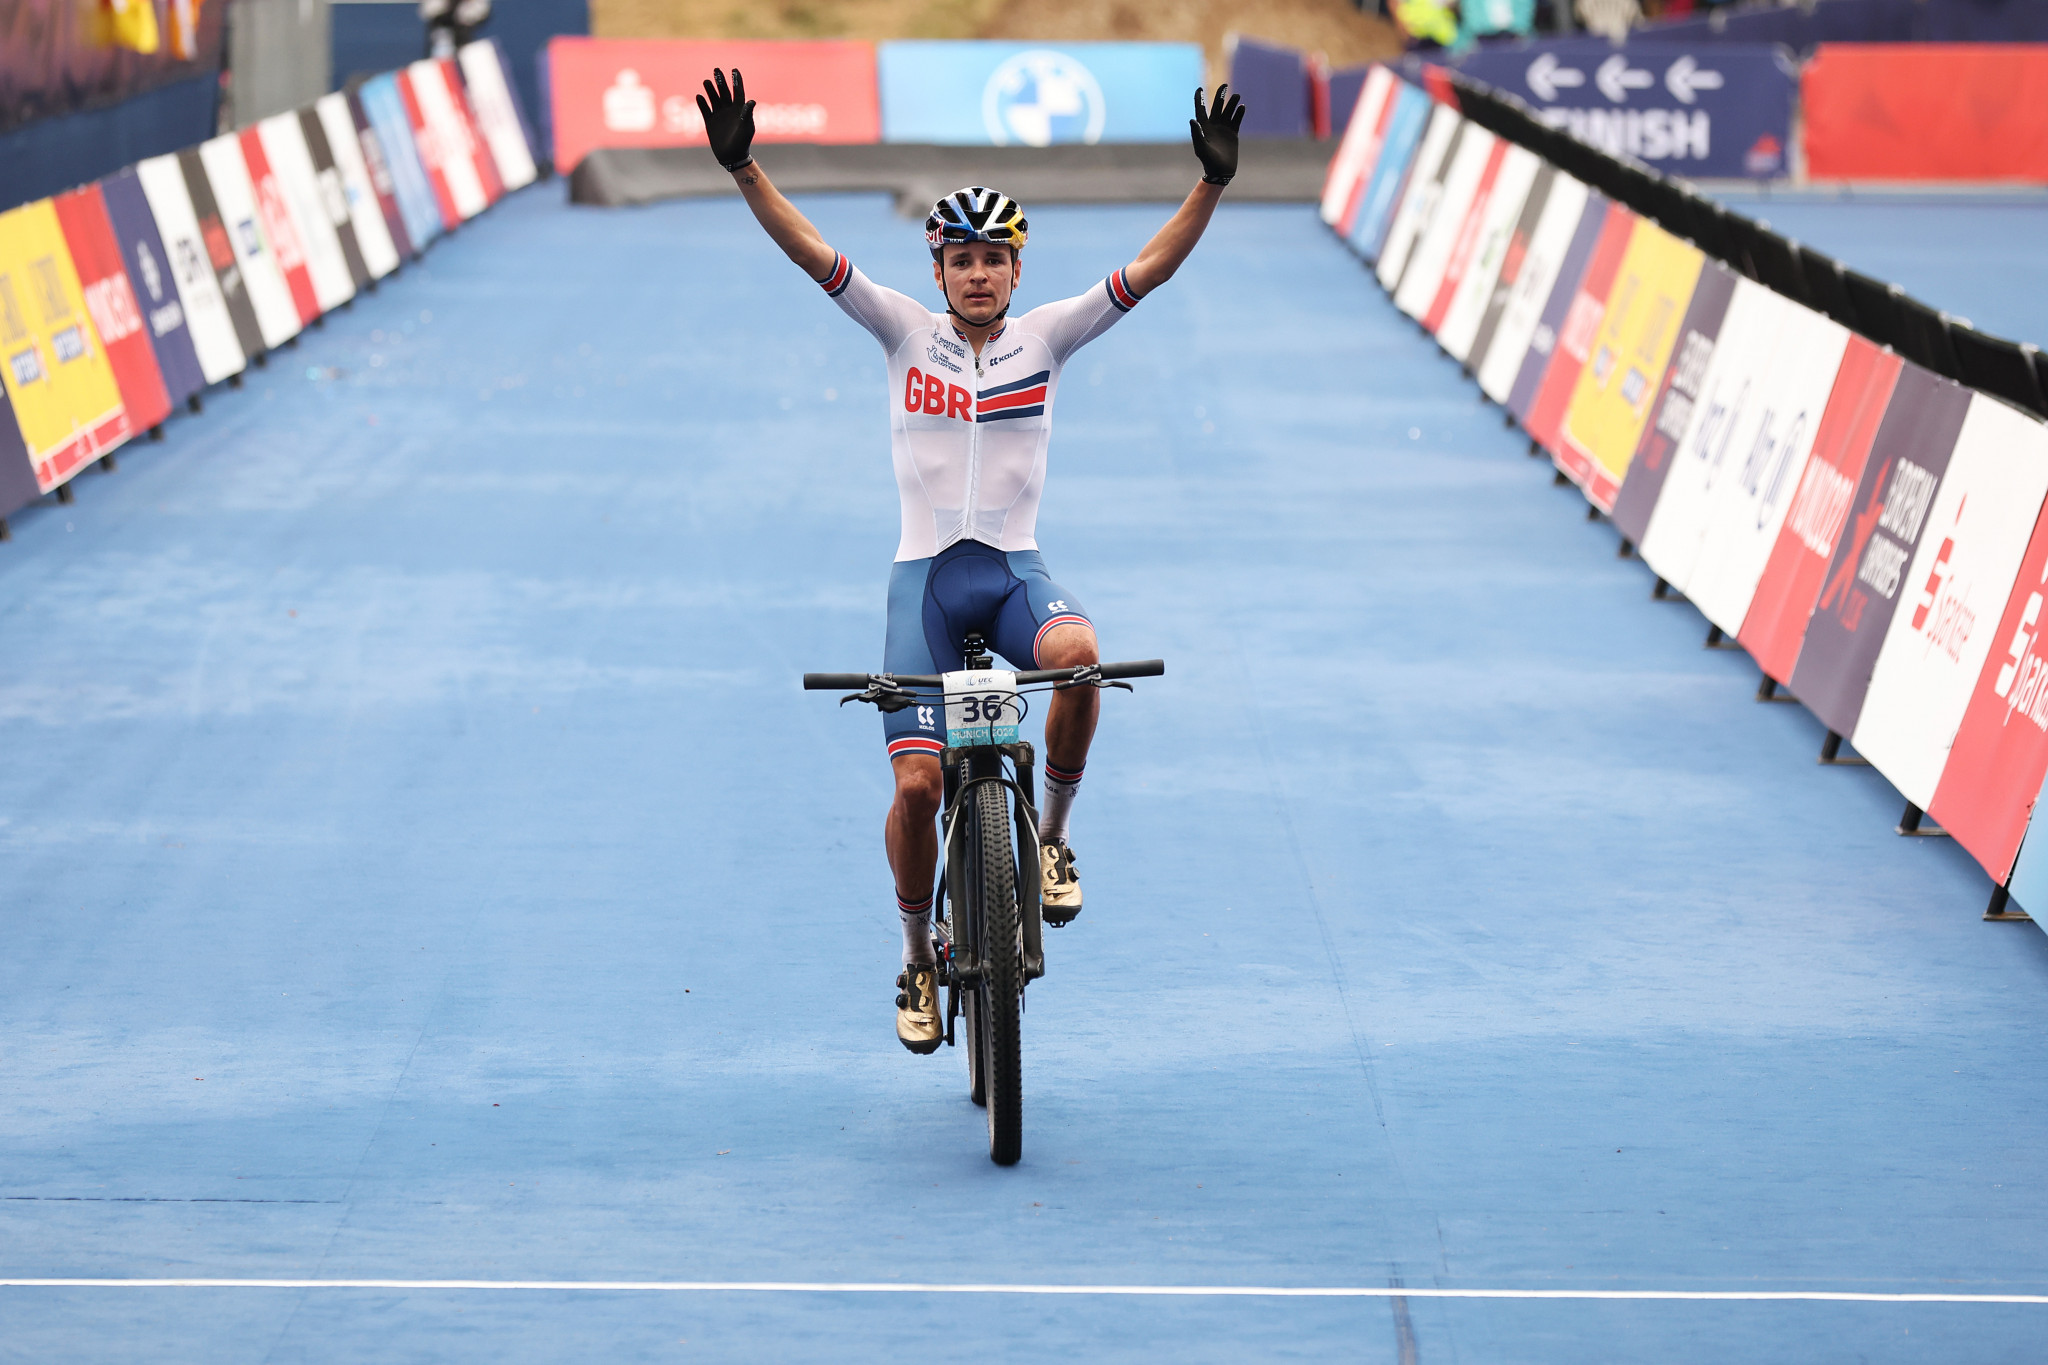 Pidcock races to dominant men's mountain bike victory at Munich 2022